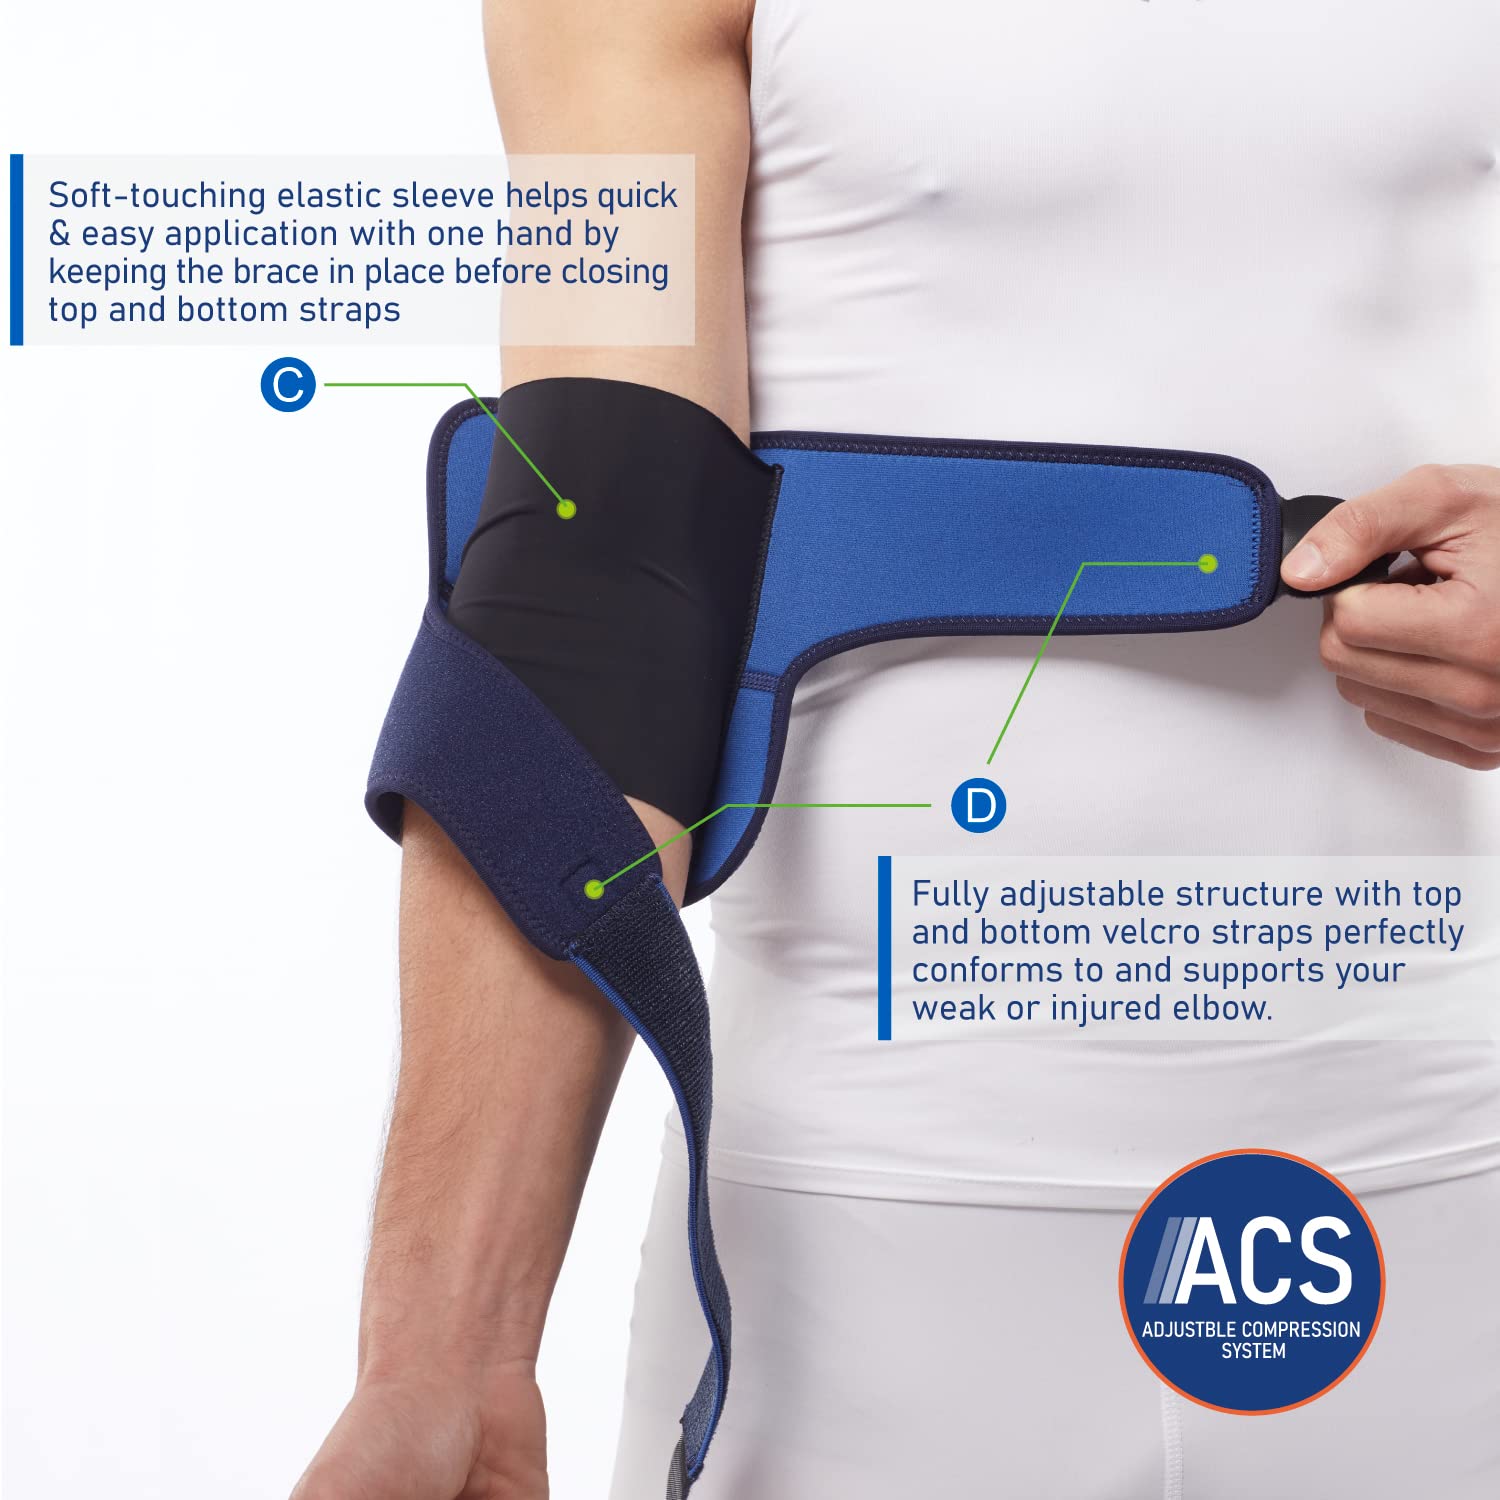 Comforband Adjustable Elbow Support Review